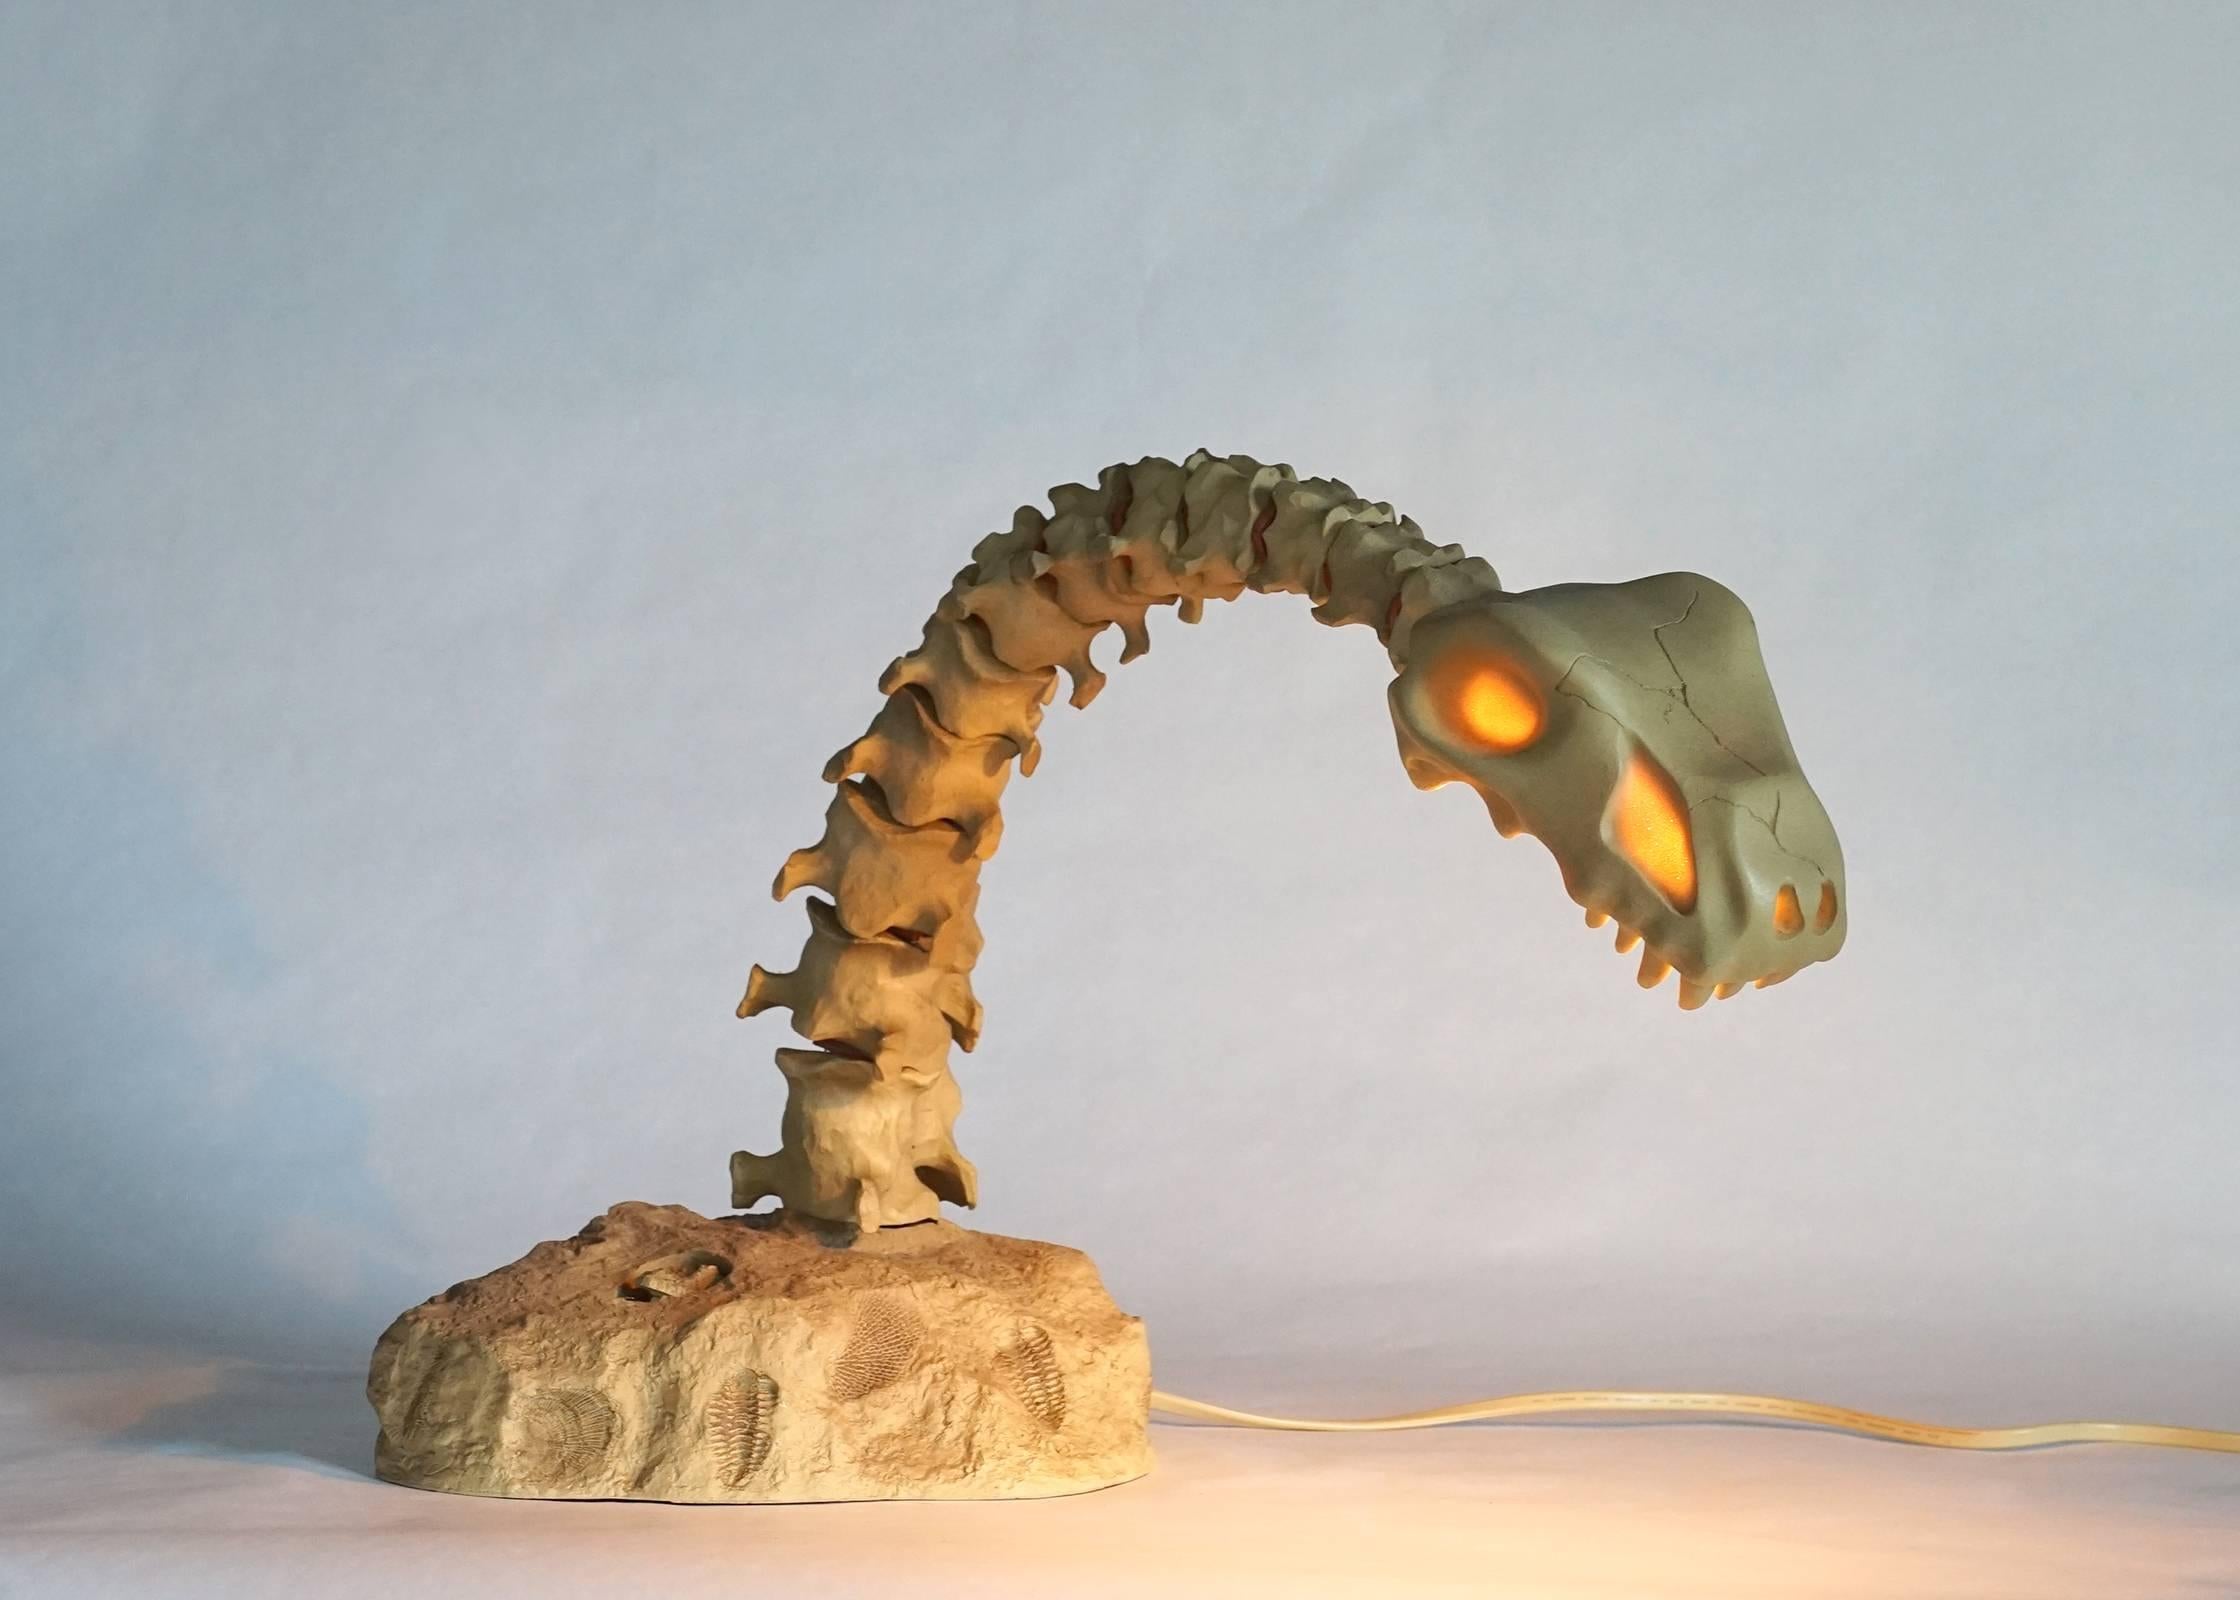 Whimsical yet functional with fully articulated neck vertebrae. The heavily weighted base makes the lamp very stable in all positions and features a faux fossilized surface and integrated switch with camouflaged fossil cap. Dimensions are variable.